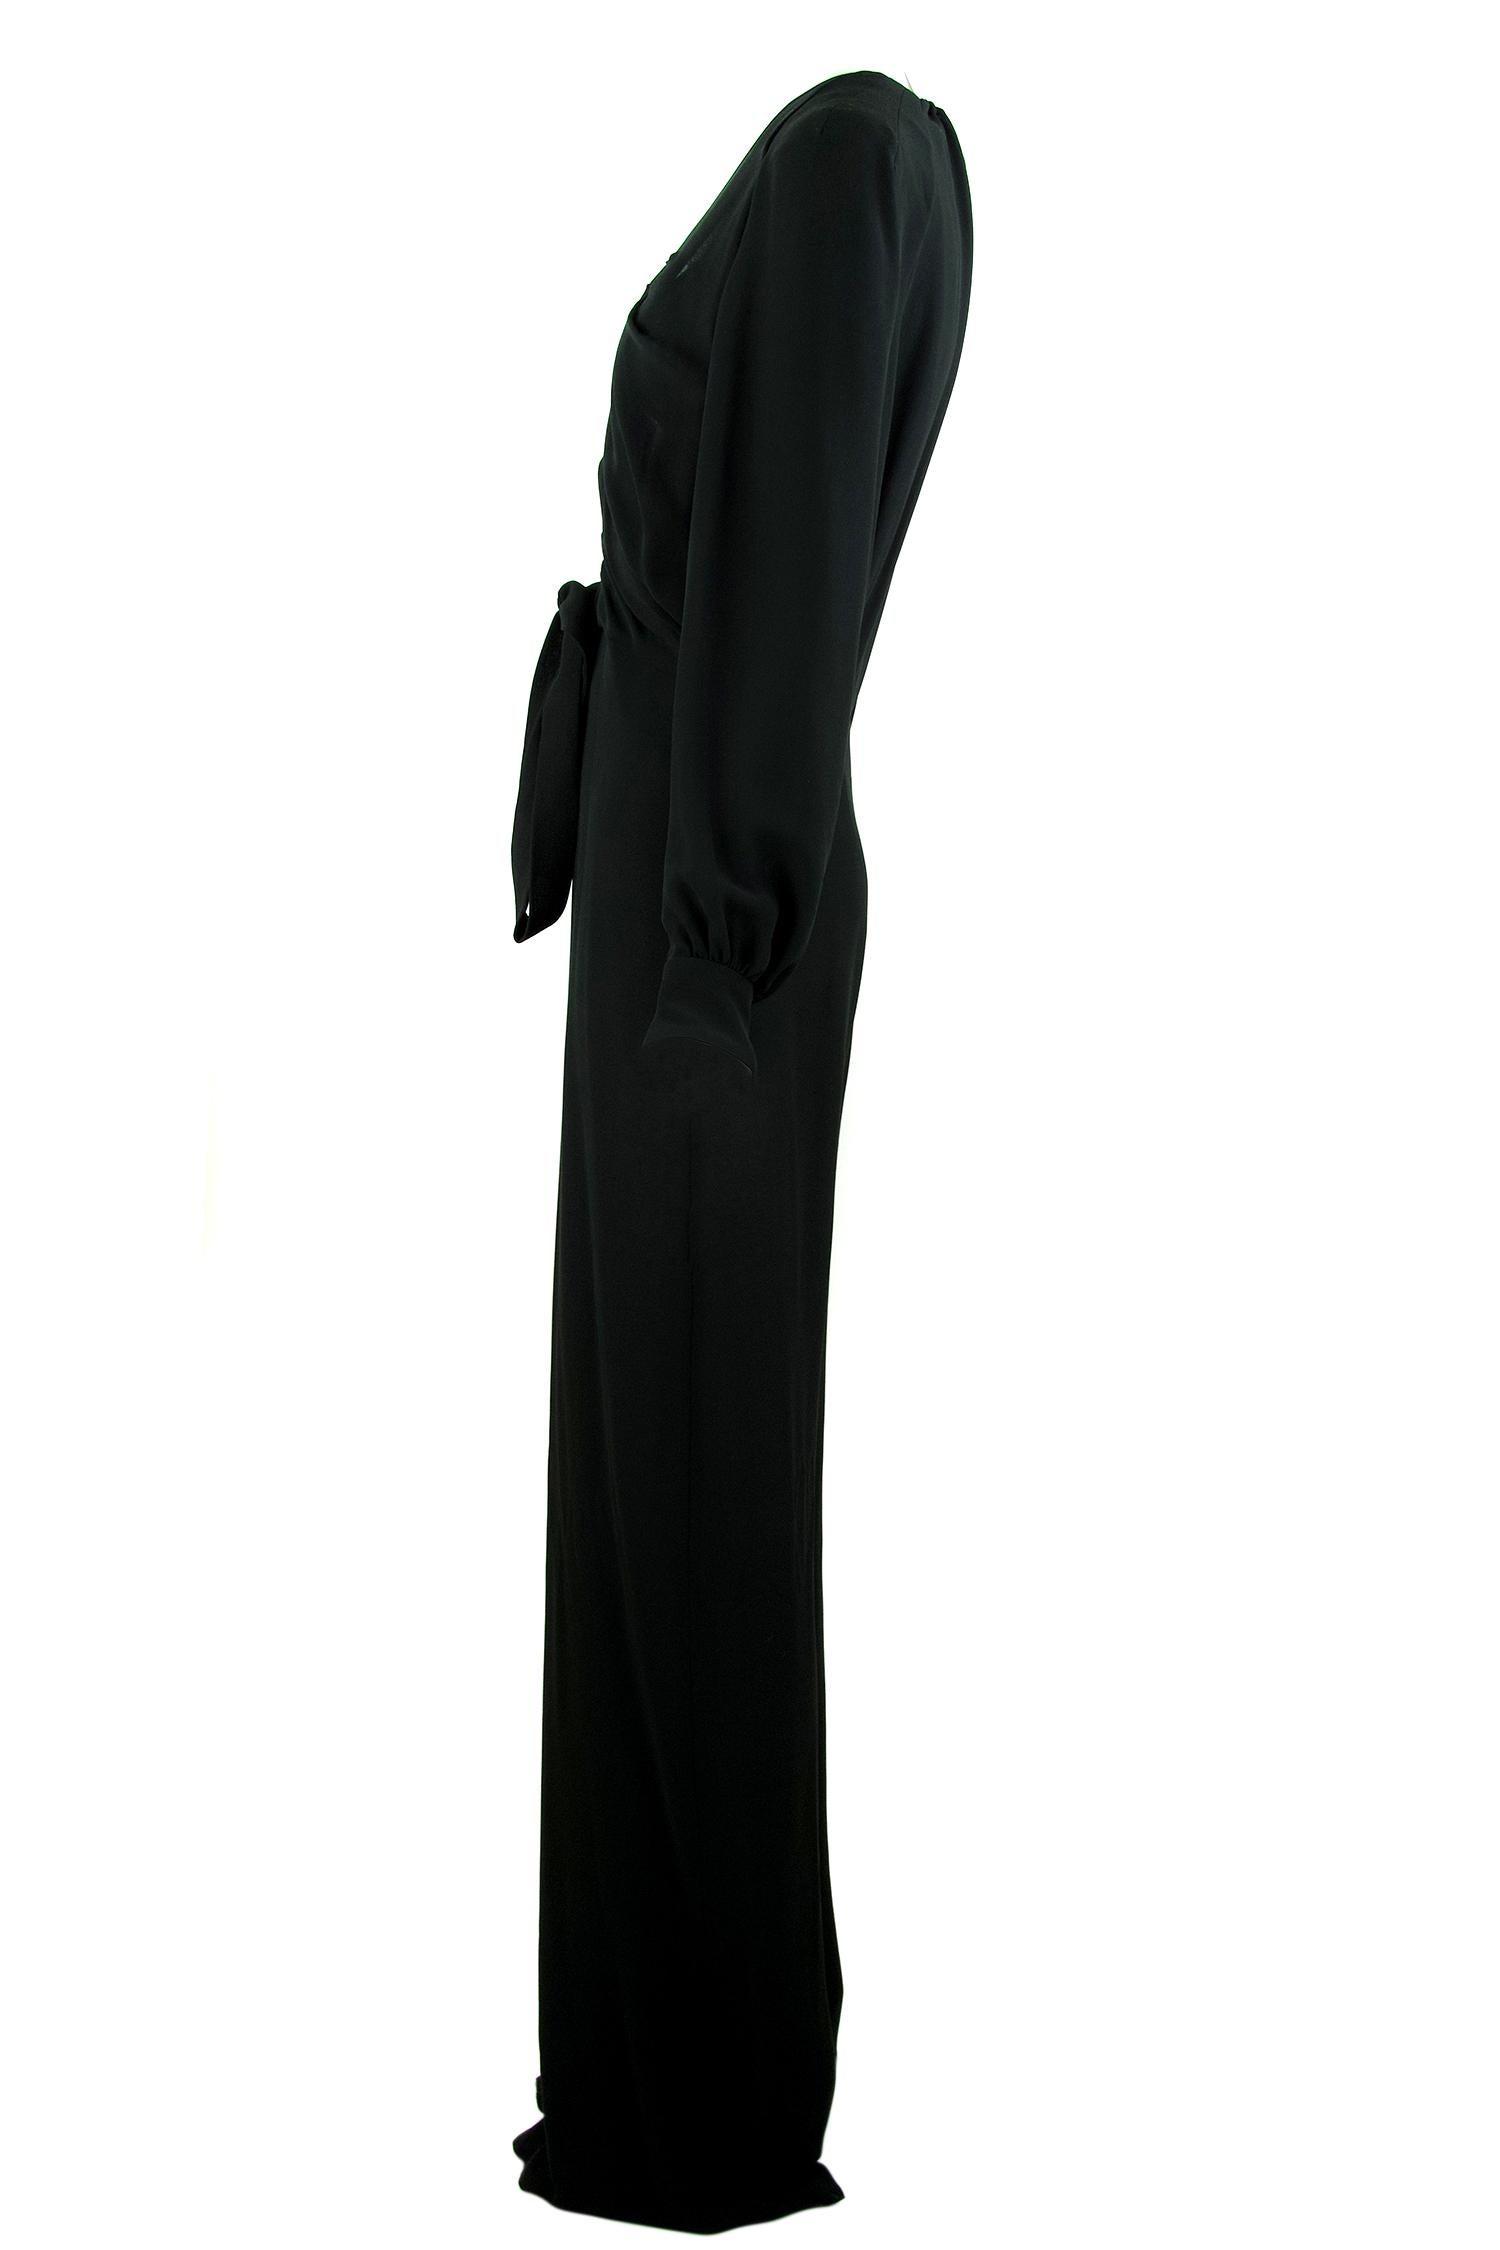 Chic and sexy Chloe long sleeve black jumpsuit.  Features gathered black silk fabric and a very low v neck with a tie at the bottom.  Gathering on the back and at the cuffs.  

Size: FR 38

Condition: Pristine

Composition: 100% silk

Care: Dry